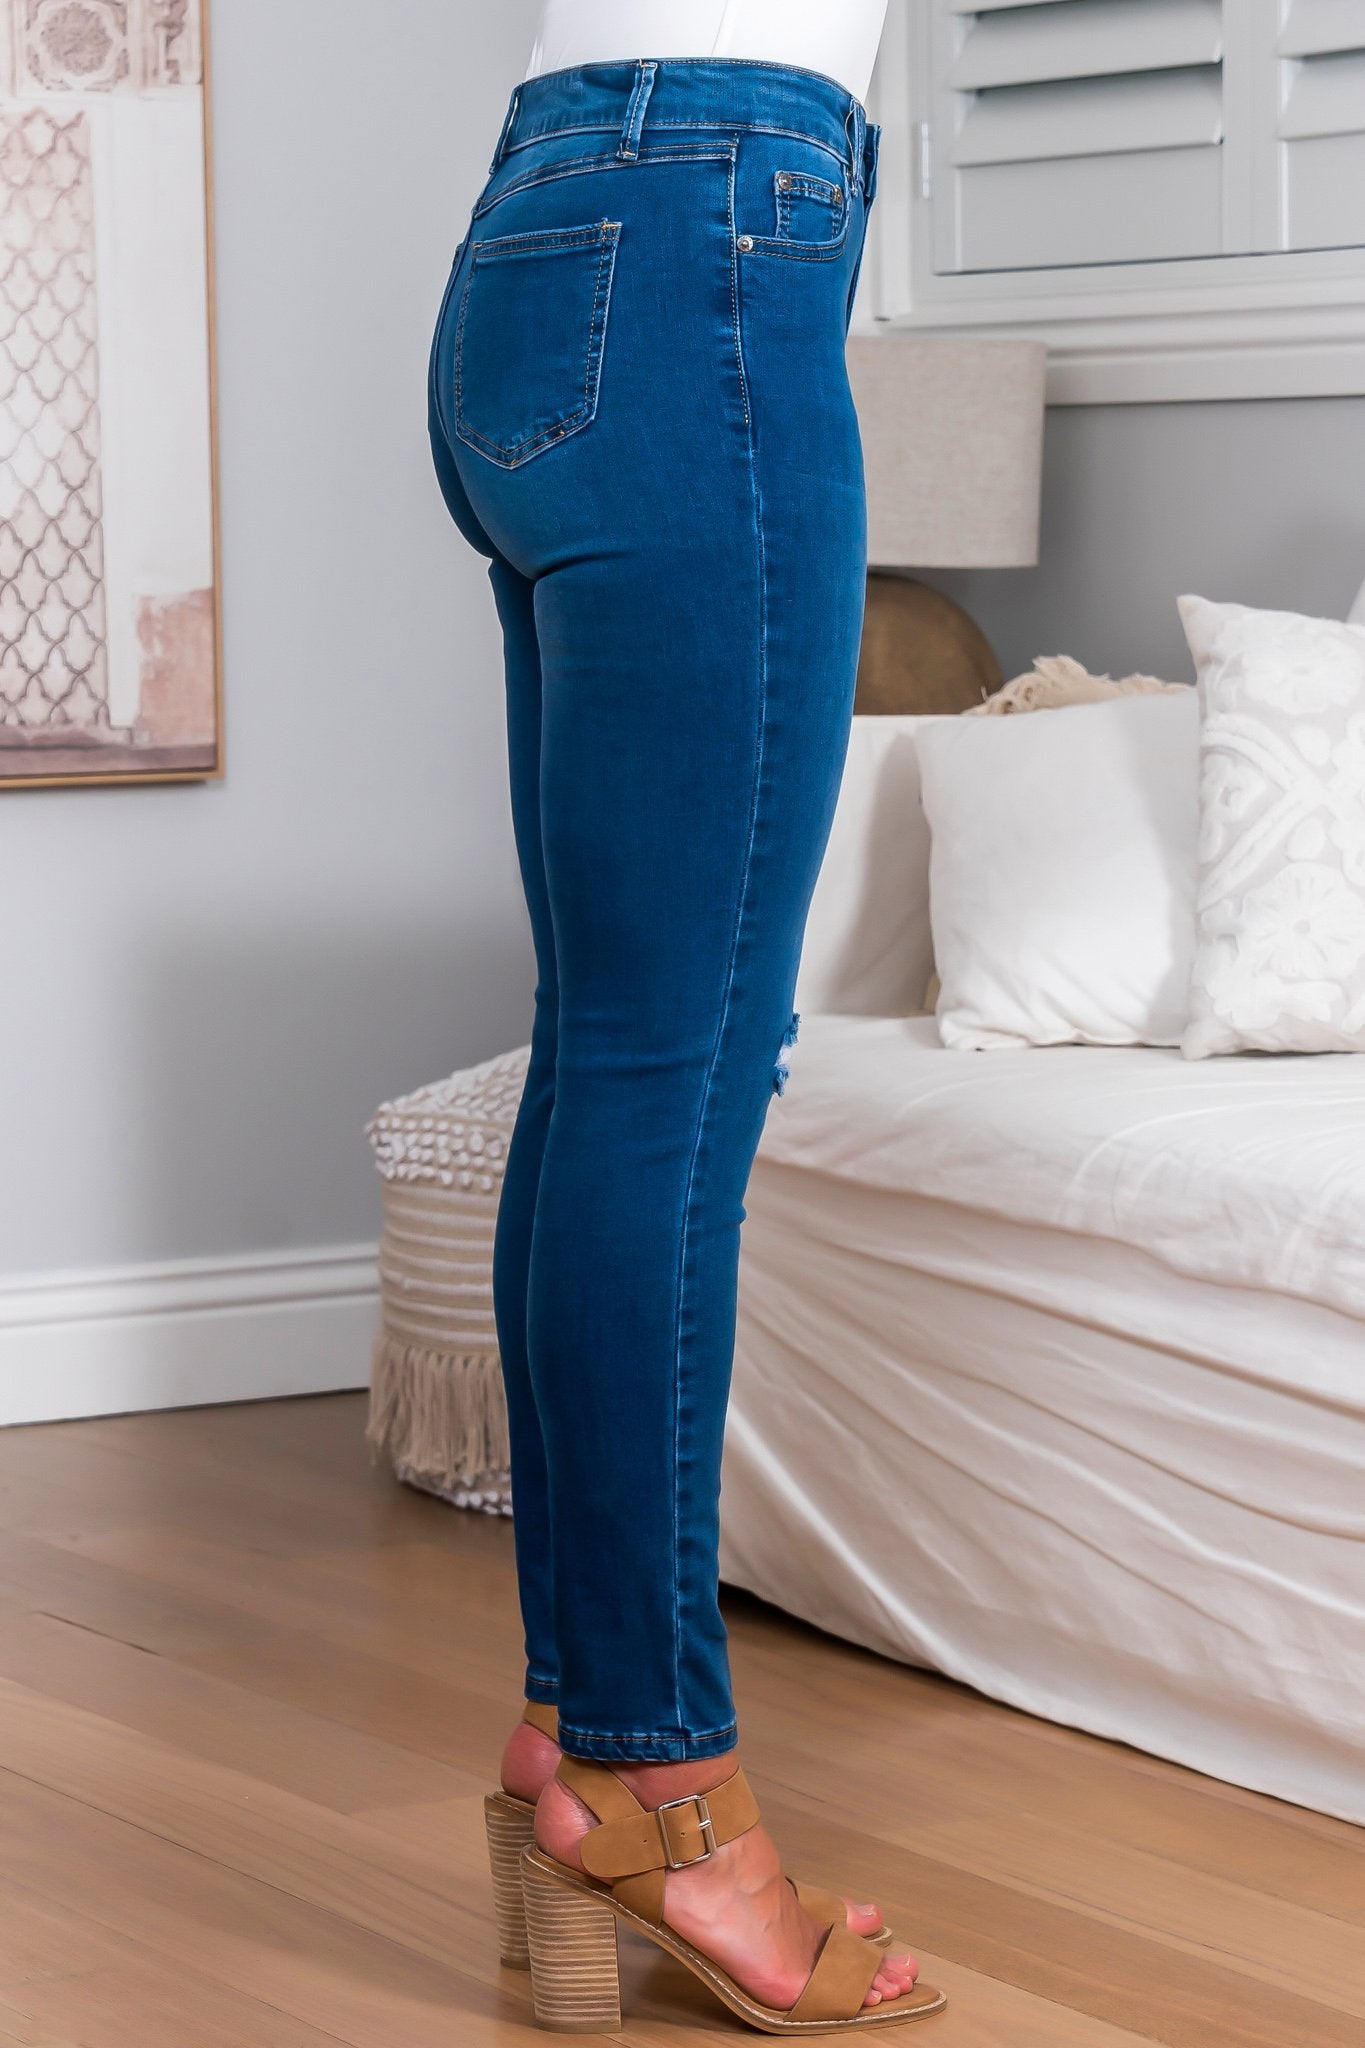 Cruise Jeans - Skinny Leg Jeans with Ripped Knees in Dark Indigo